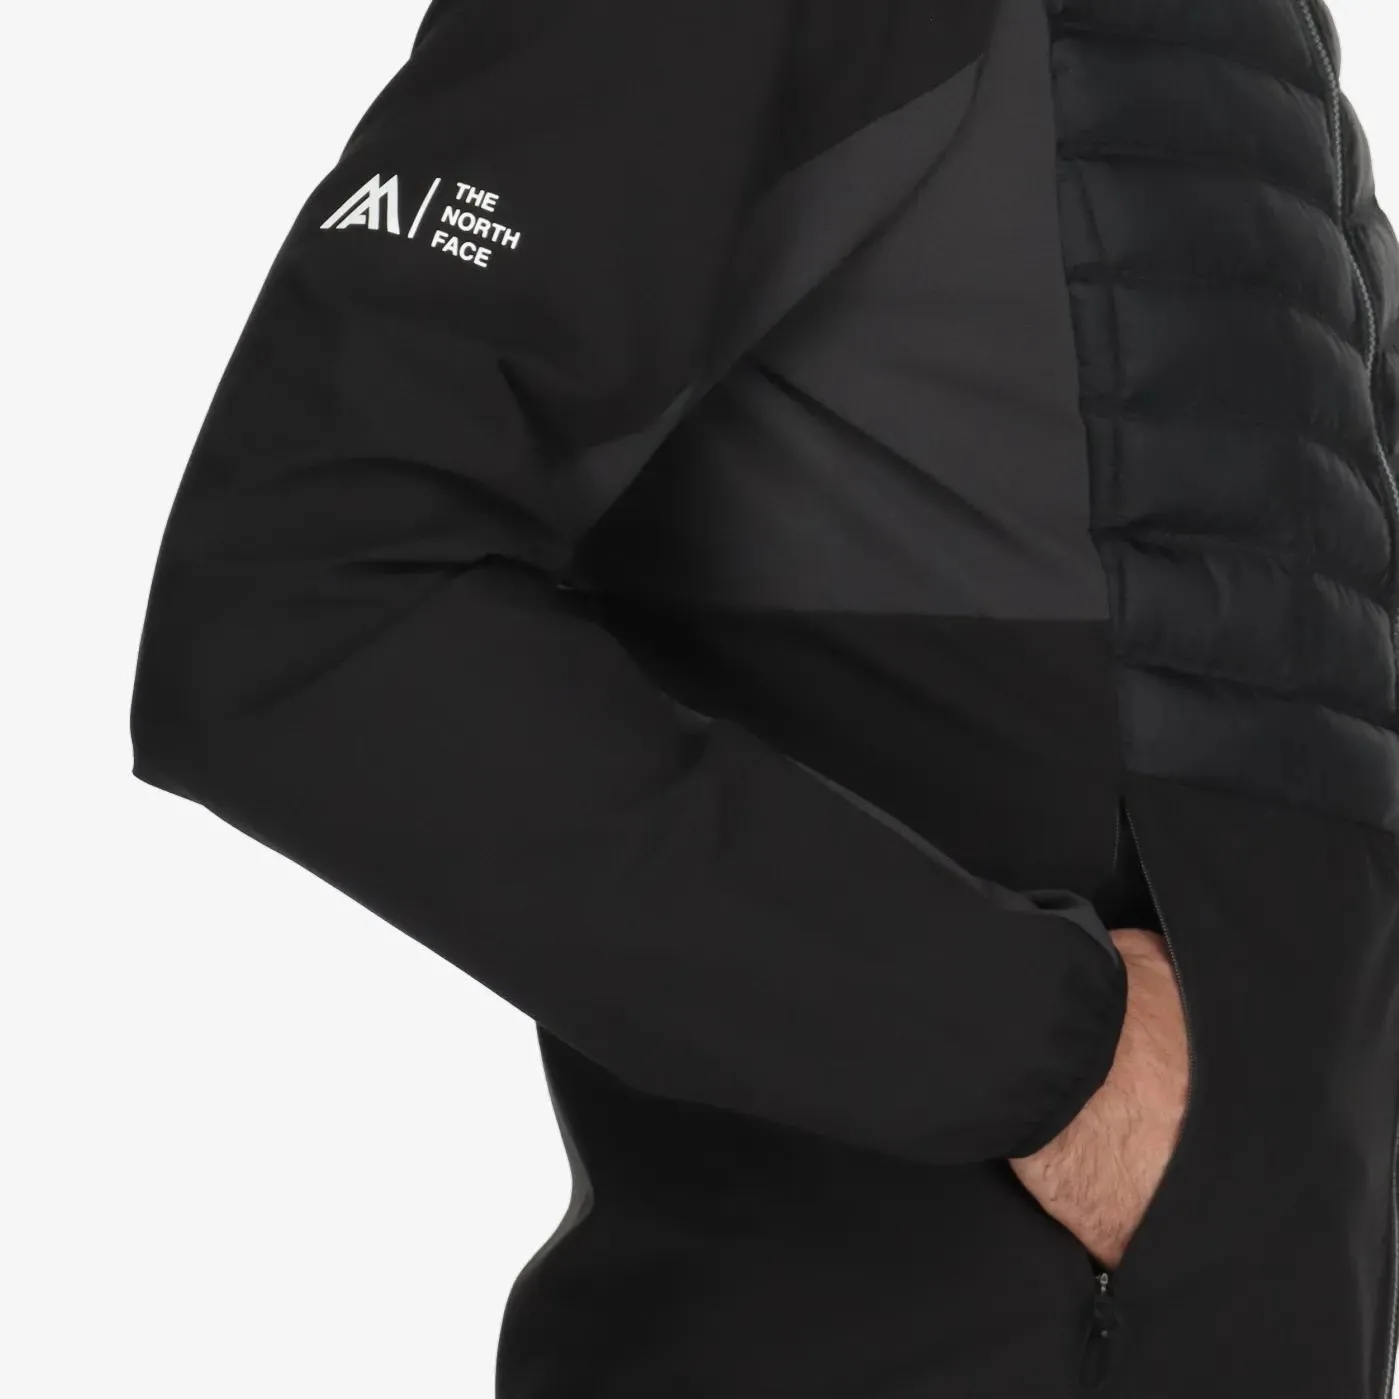 THE NORTH FACE MENS MA LAB HYBRID THERMOBALL JACKET - 